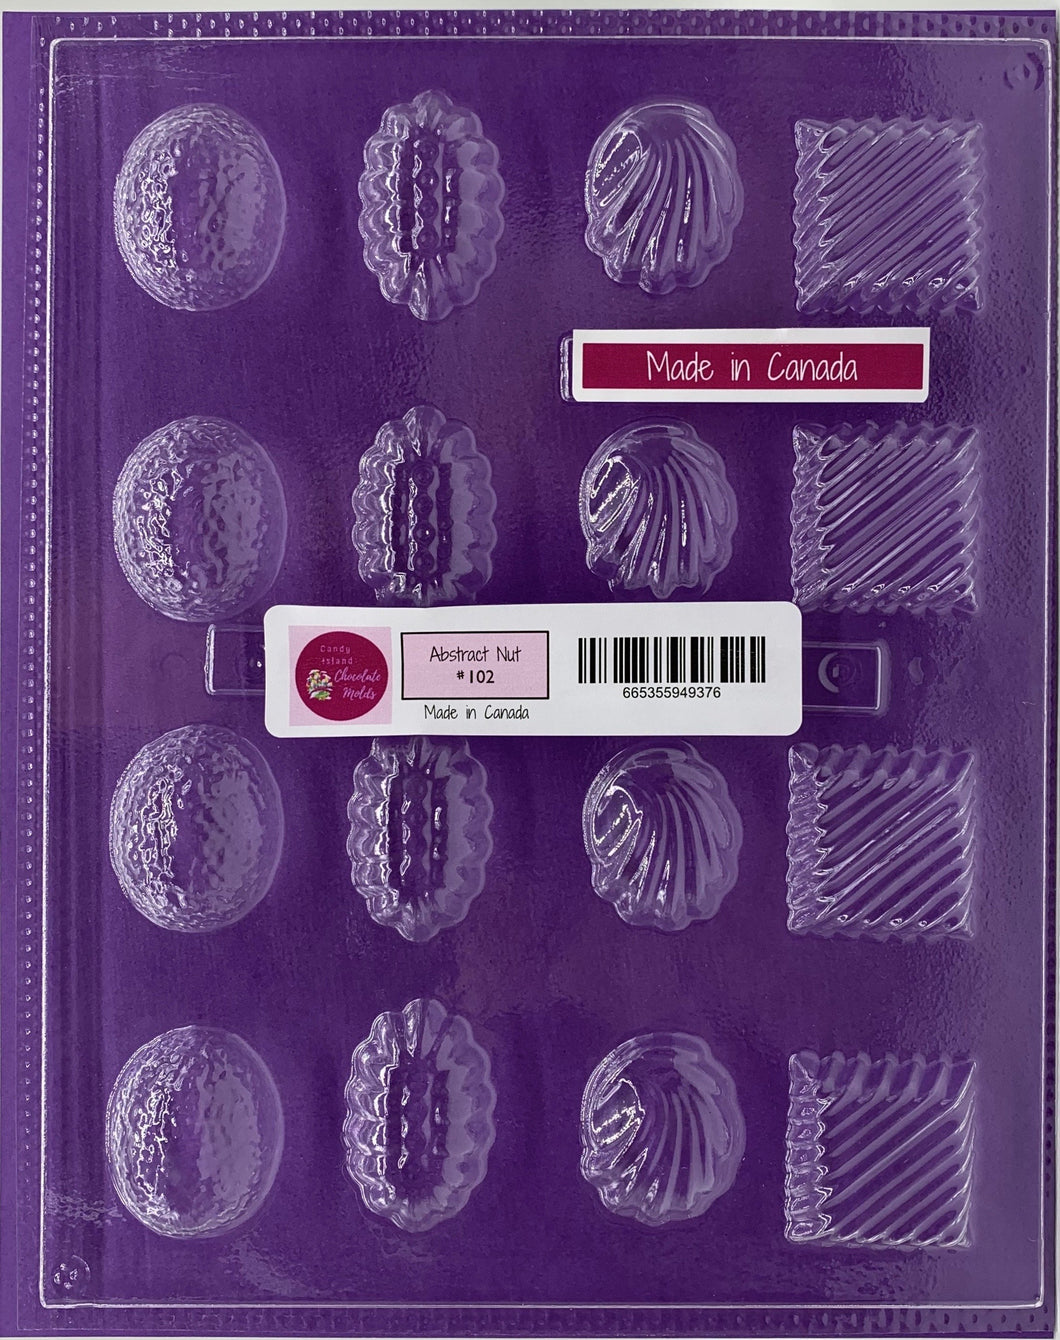 Candy Island Chocolate Mold  - Abstract Nut #102